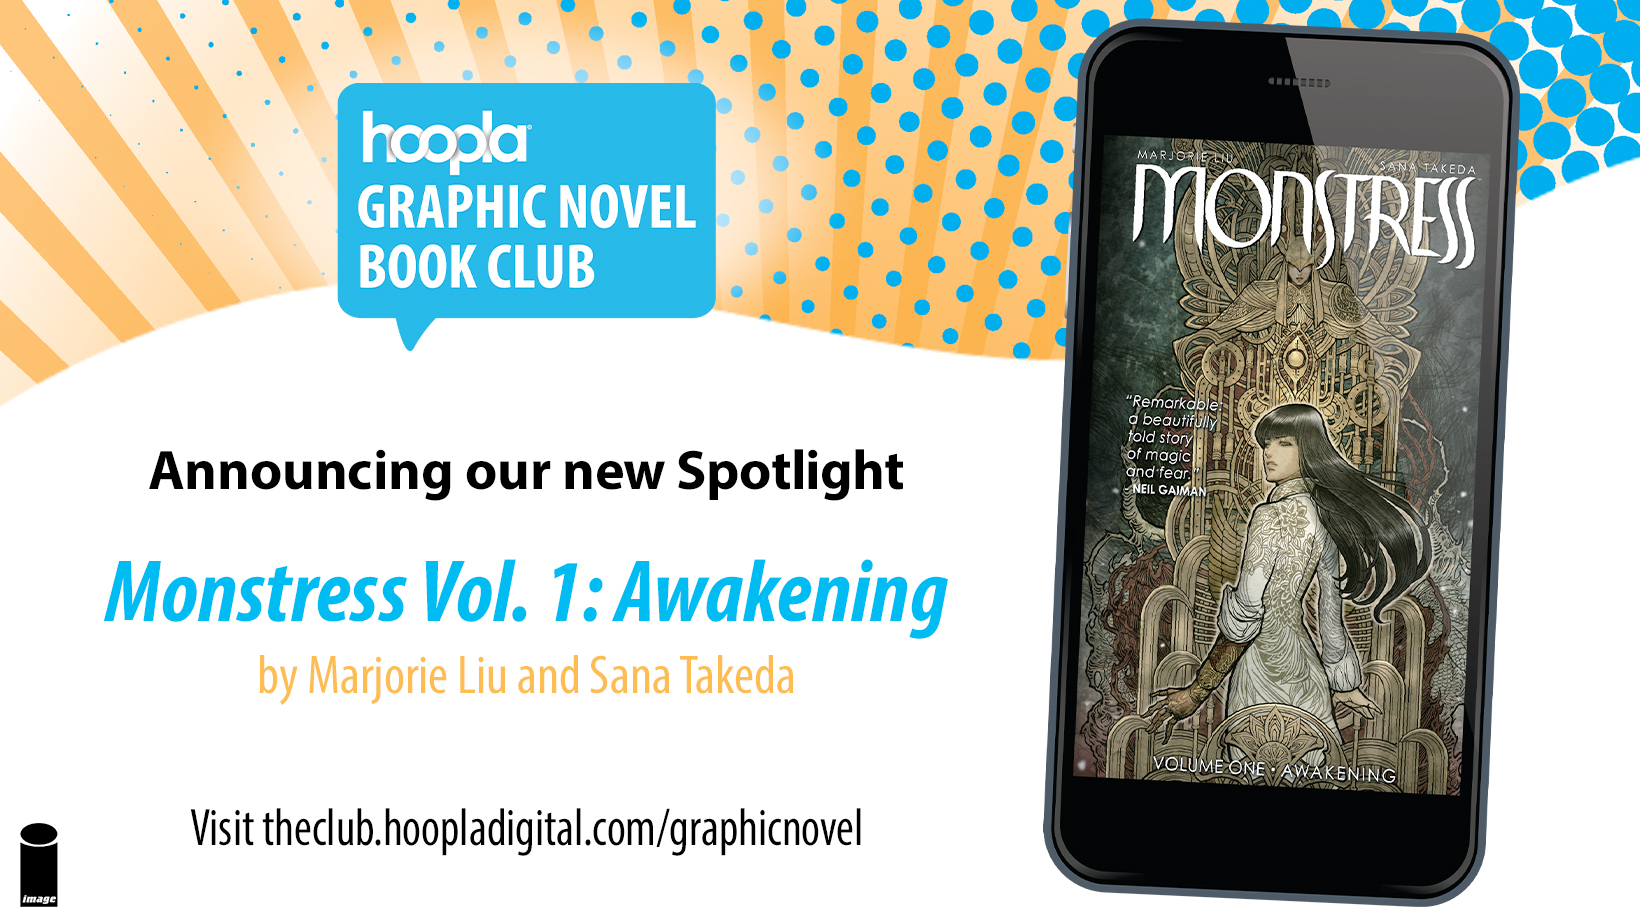 Hoopla graphic novel book club recommended title: Monstress Volume 1: Awakening